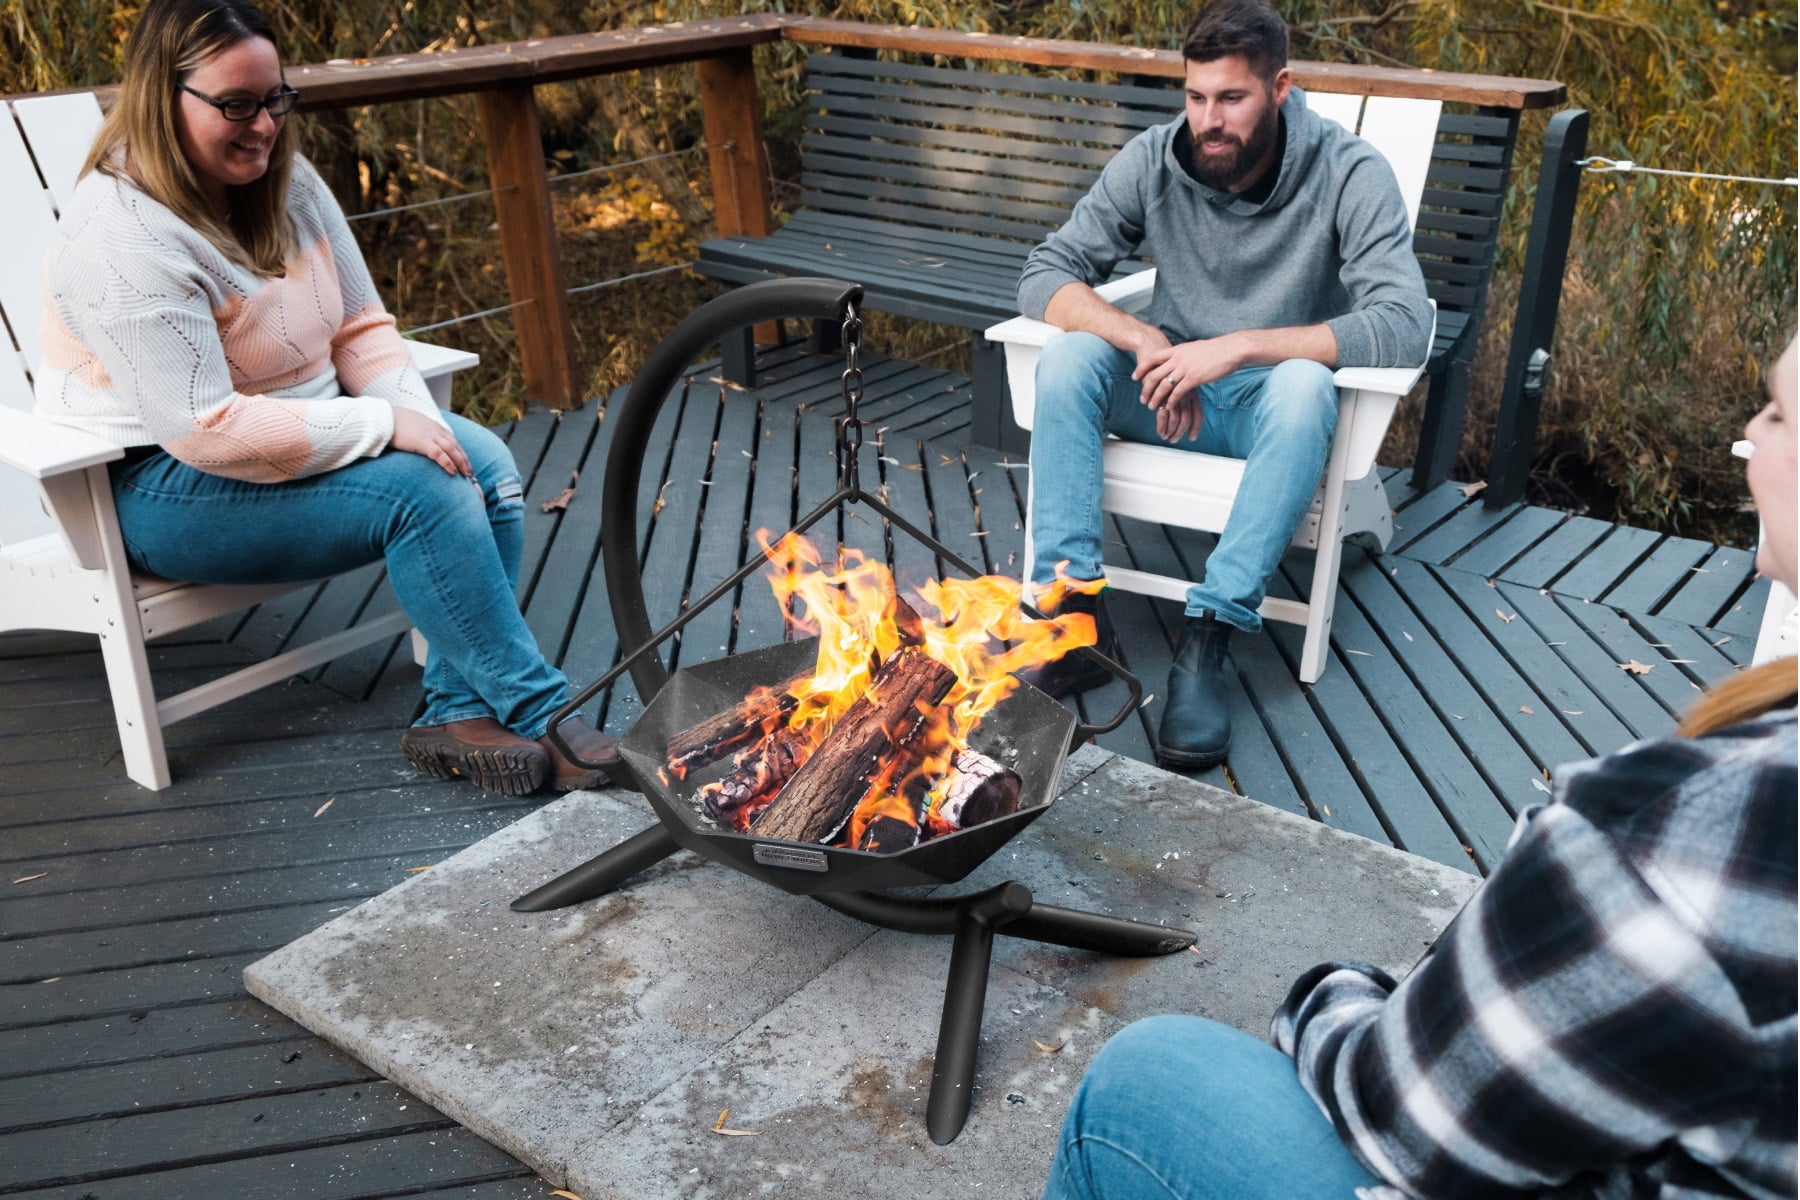 People using hanging fire pit on wood deck